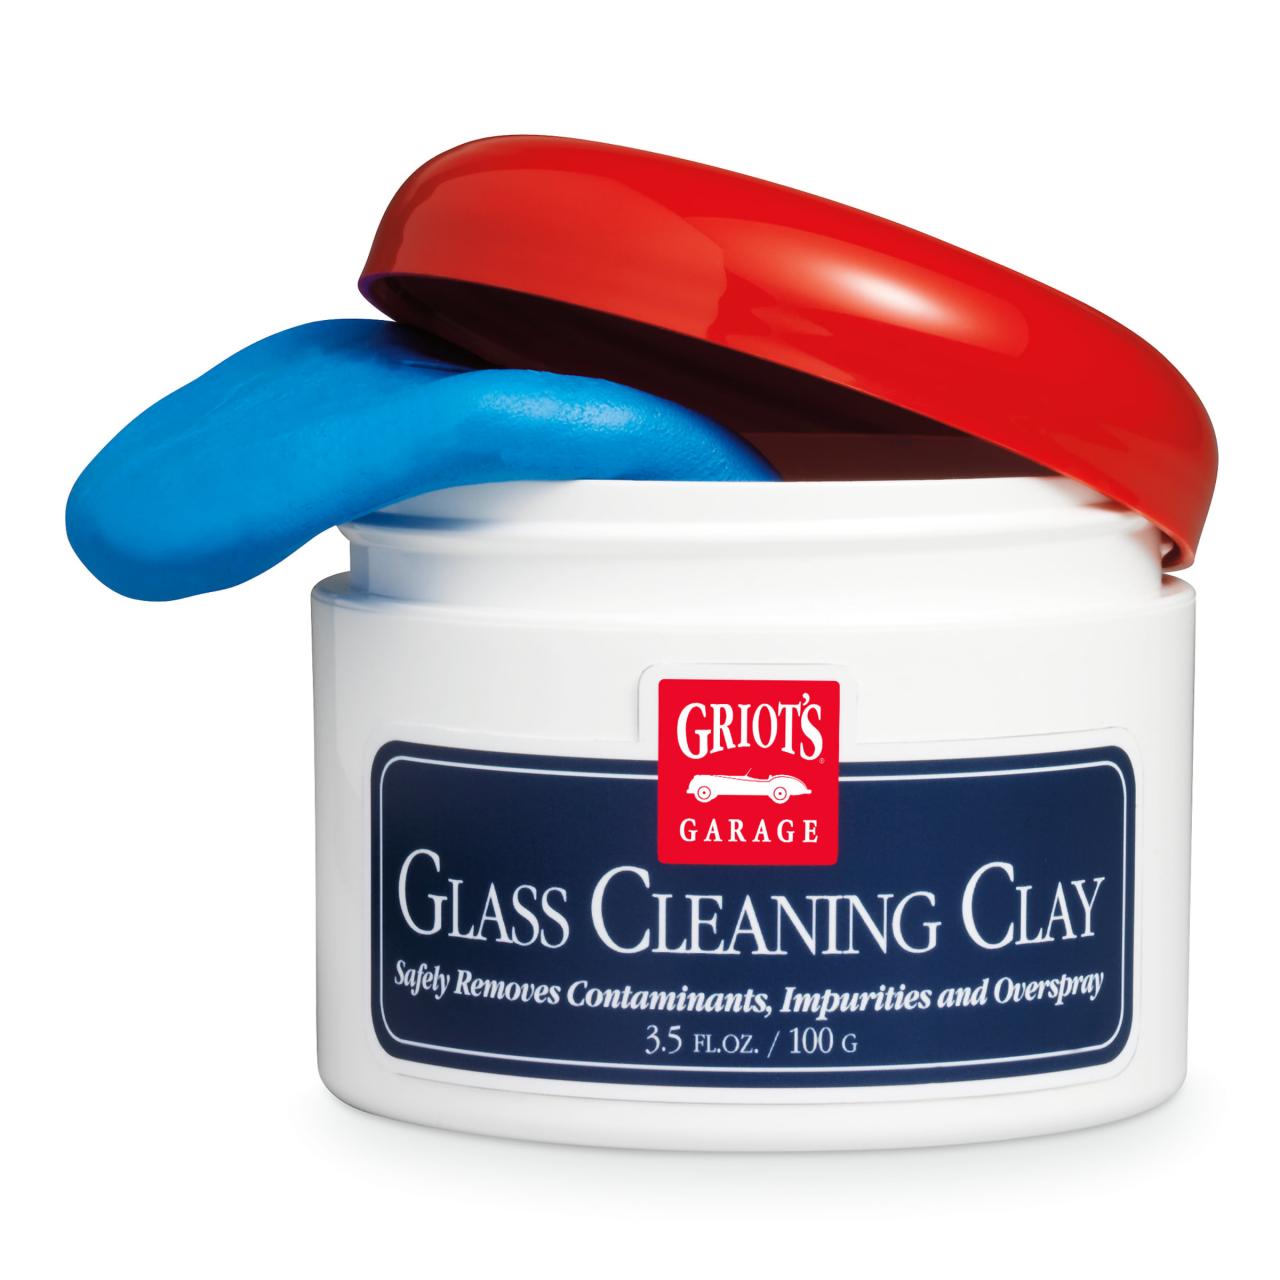 Glass Cleaning Clay, 3.5 Ounces - Griot's Garage